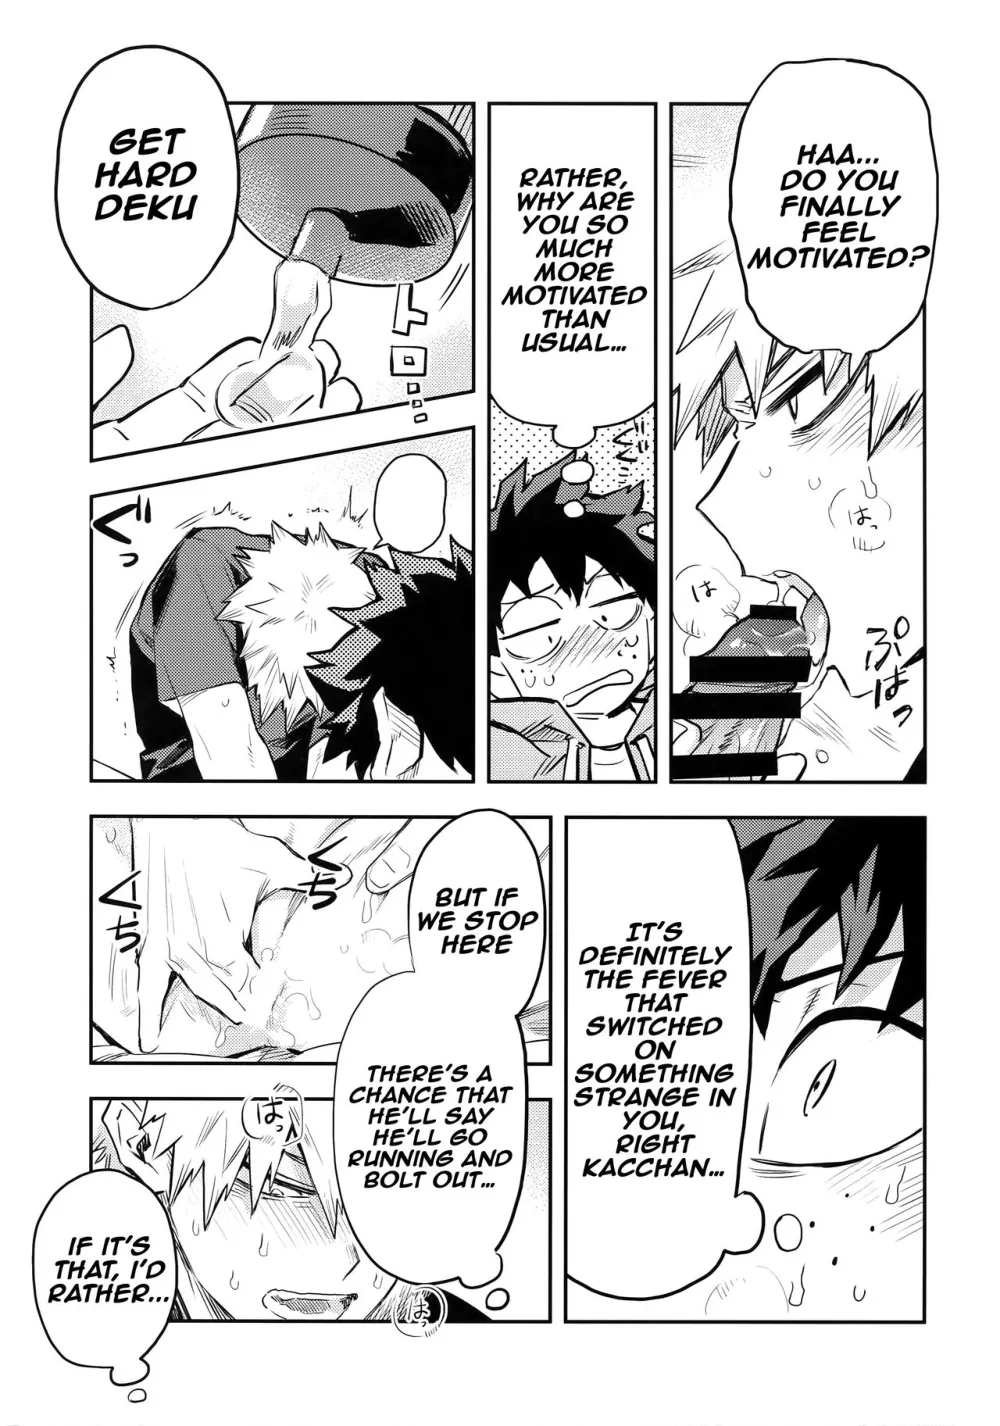 The Battle Between Sick Kacchan and Me - Page 10